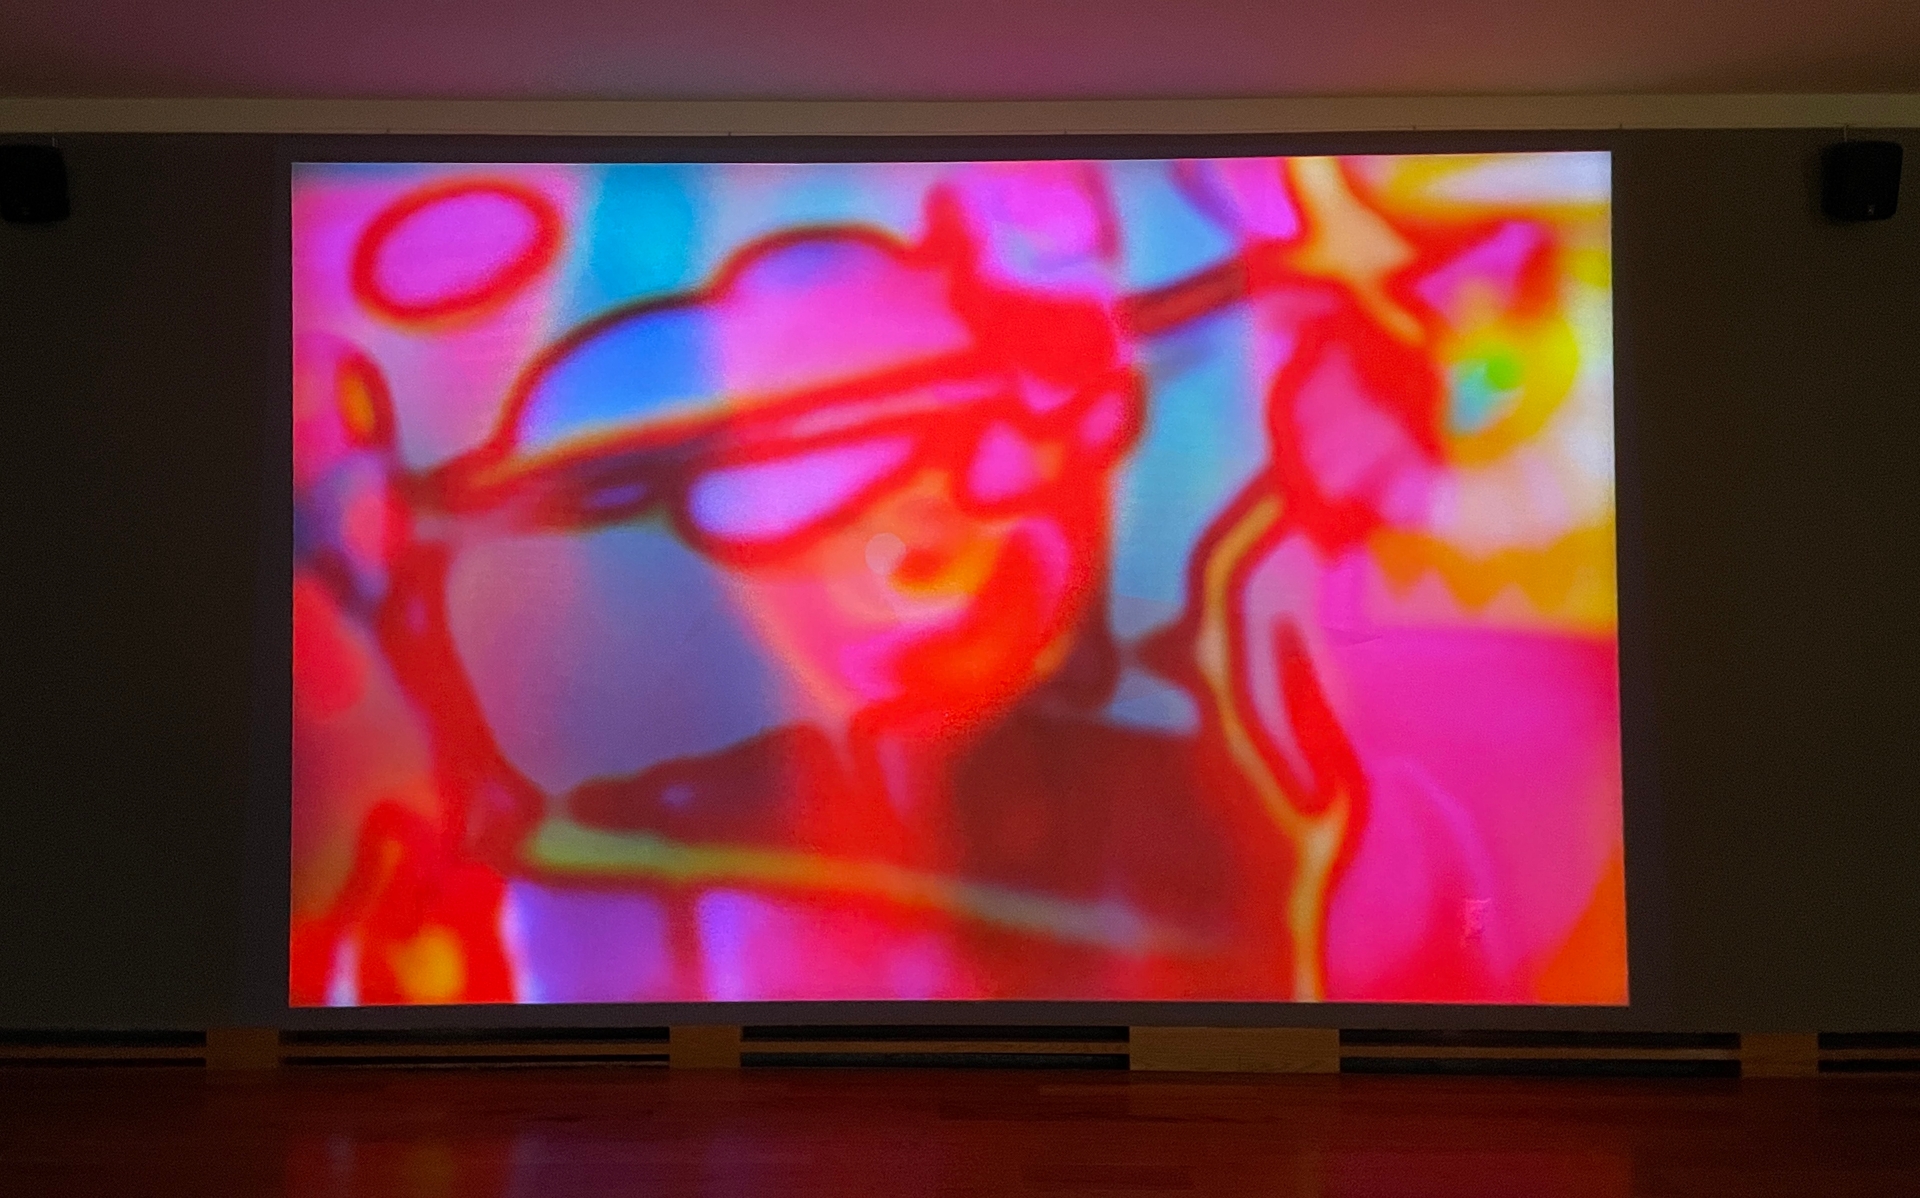 View of the main projection showing a collage of overlayed videos